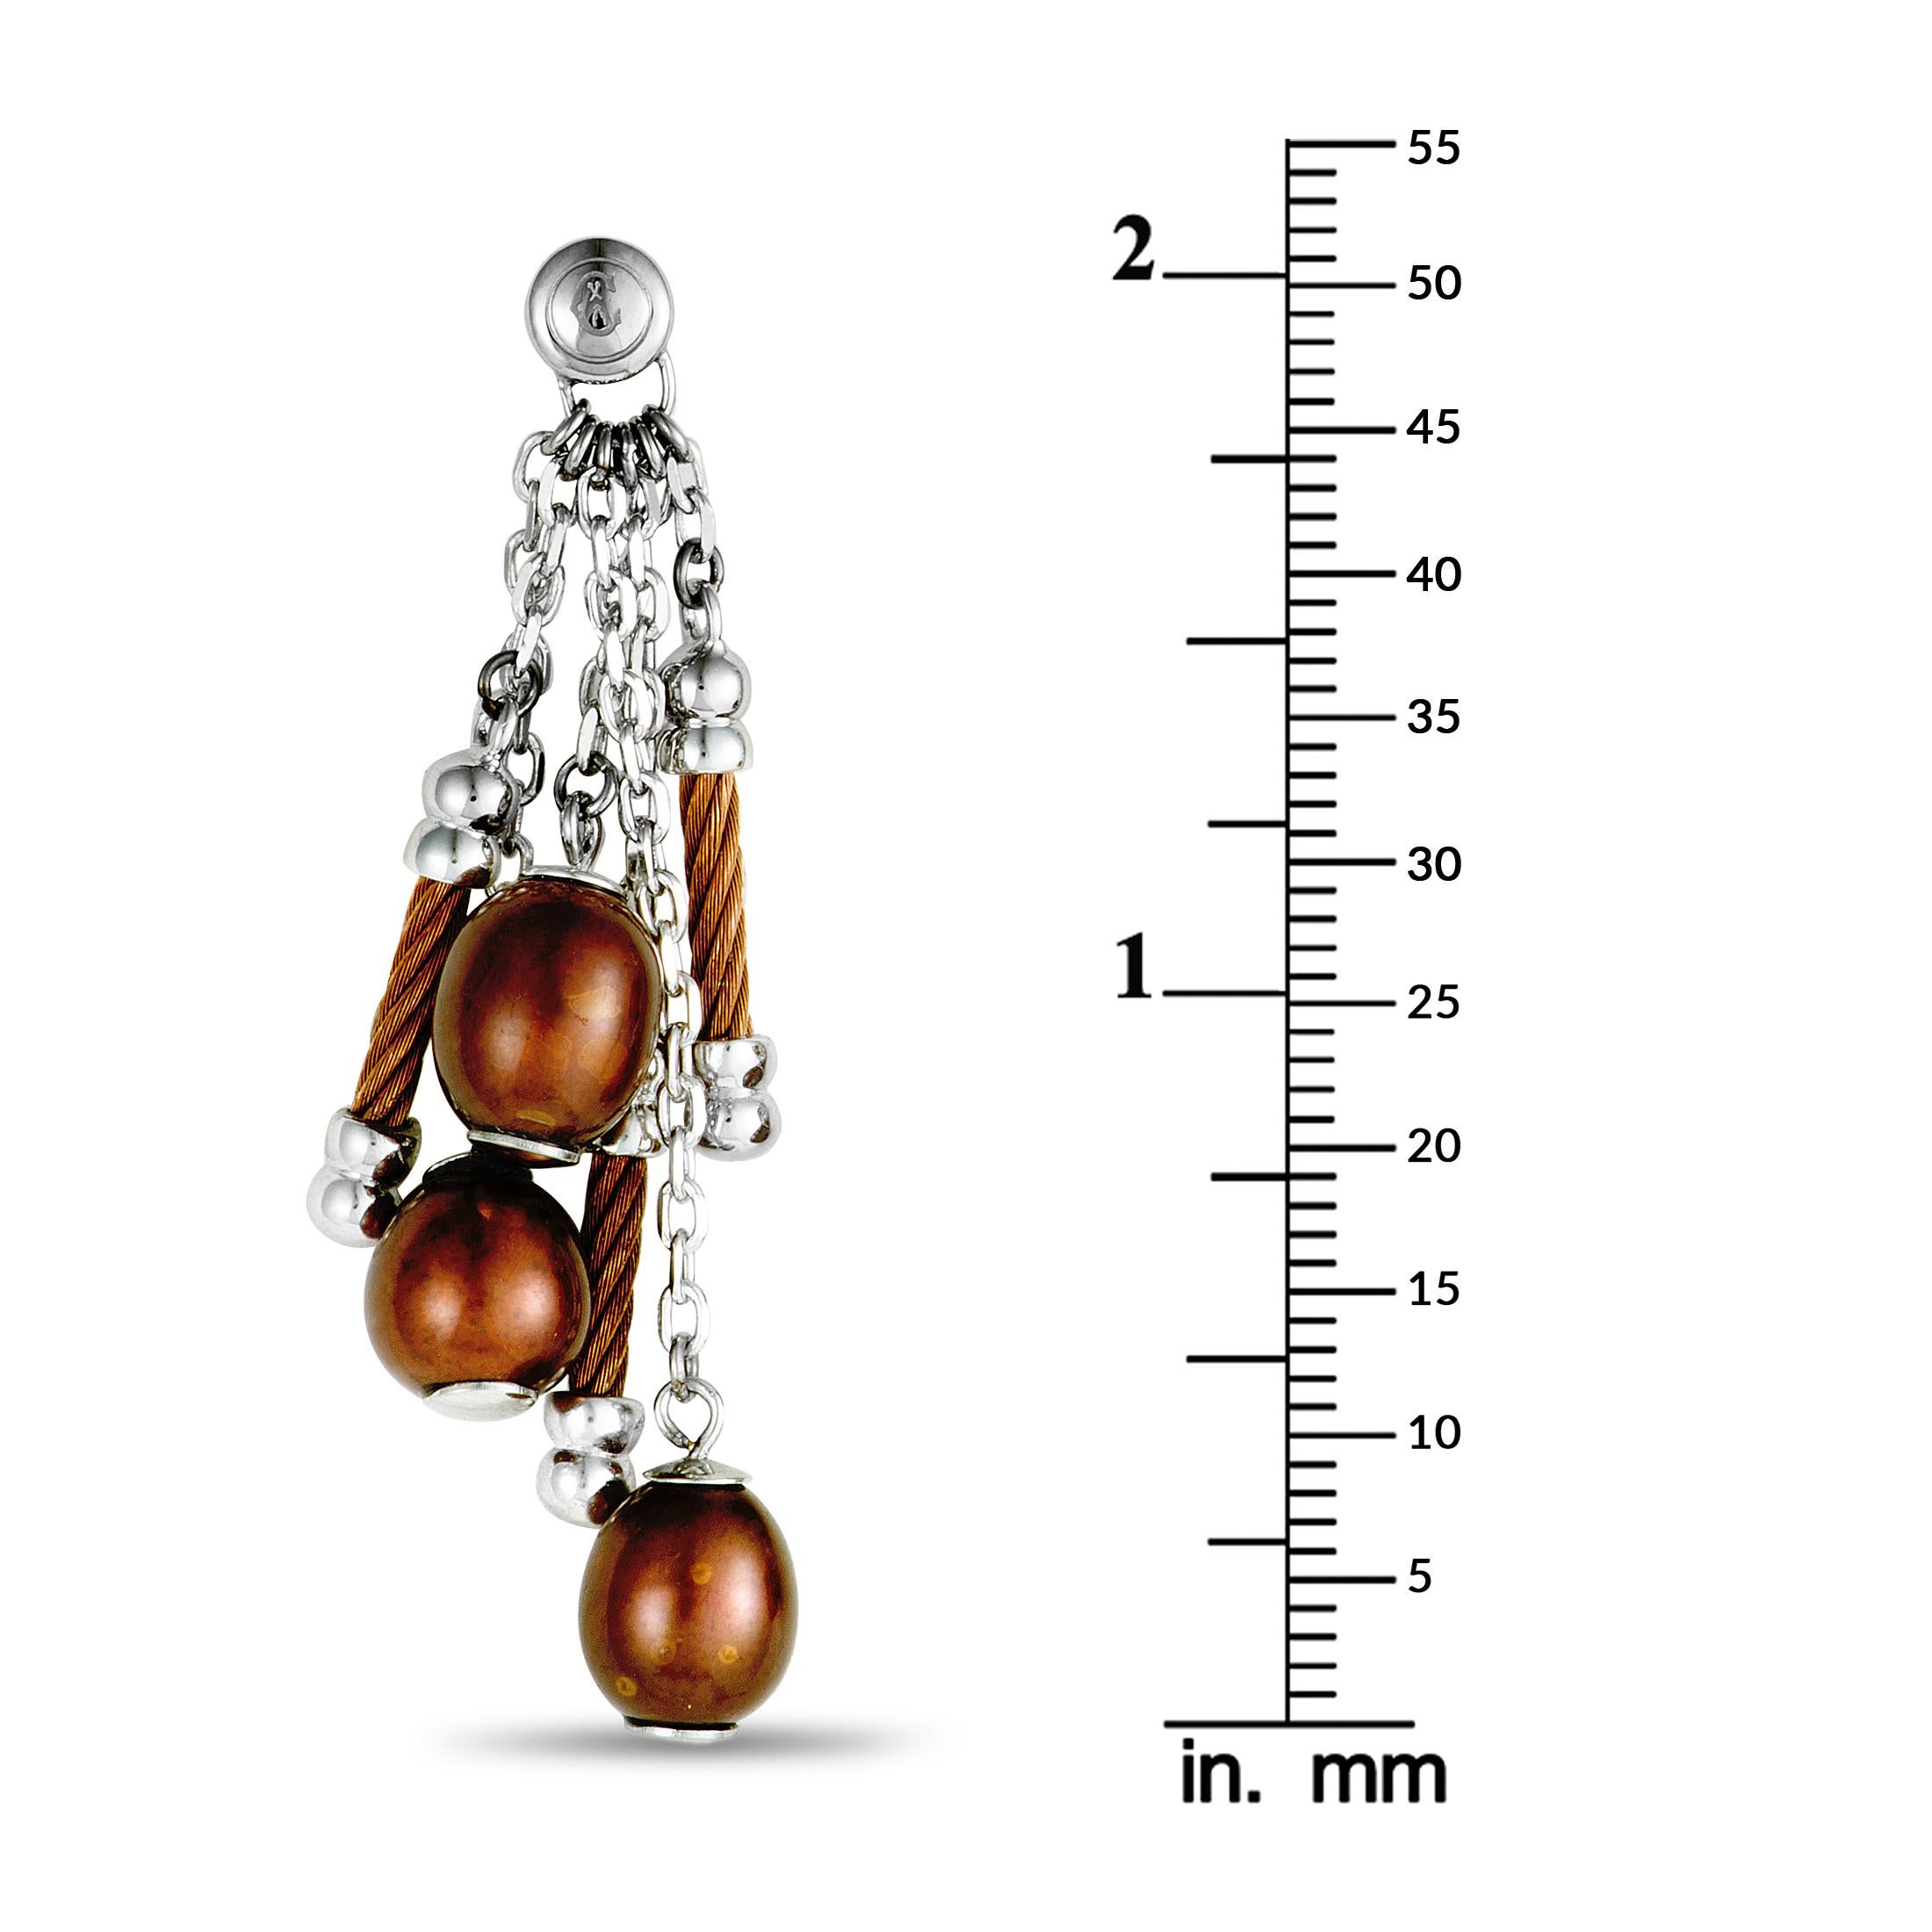 These fashionable “Pearl” earrings presented by Charriol are wonderfully crafted from partially bronze PVD-coated stainless steel and embellished with attractive brown pearls. Each of the two earrings weighs six grams.